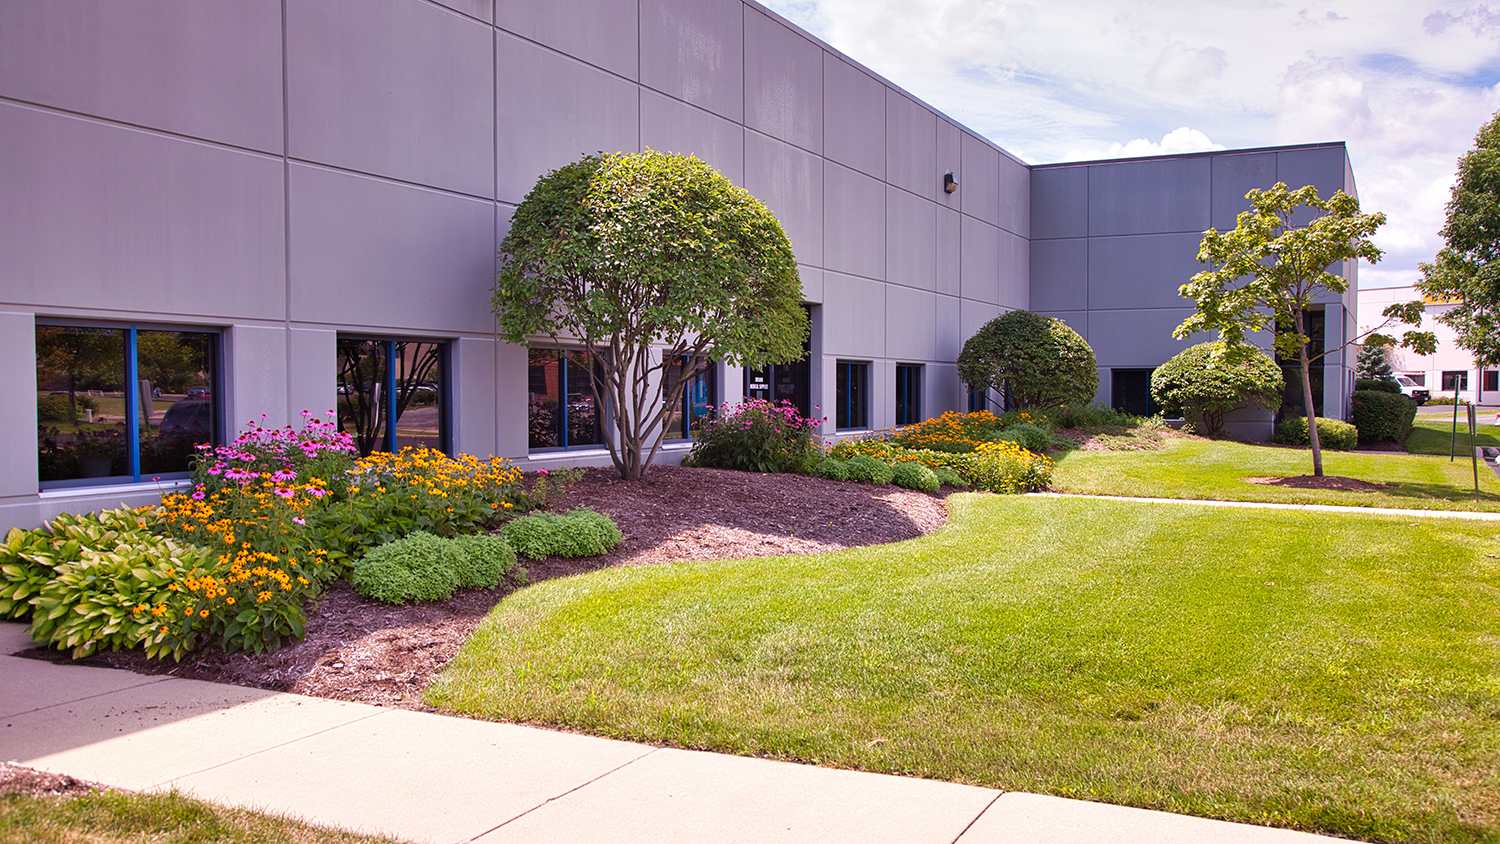 Clear Height Properties Acquires 33 Asset Industrial Portfolio Totaling